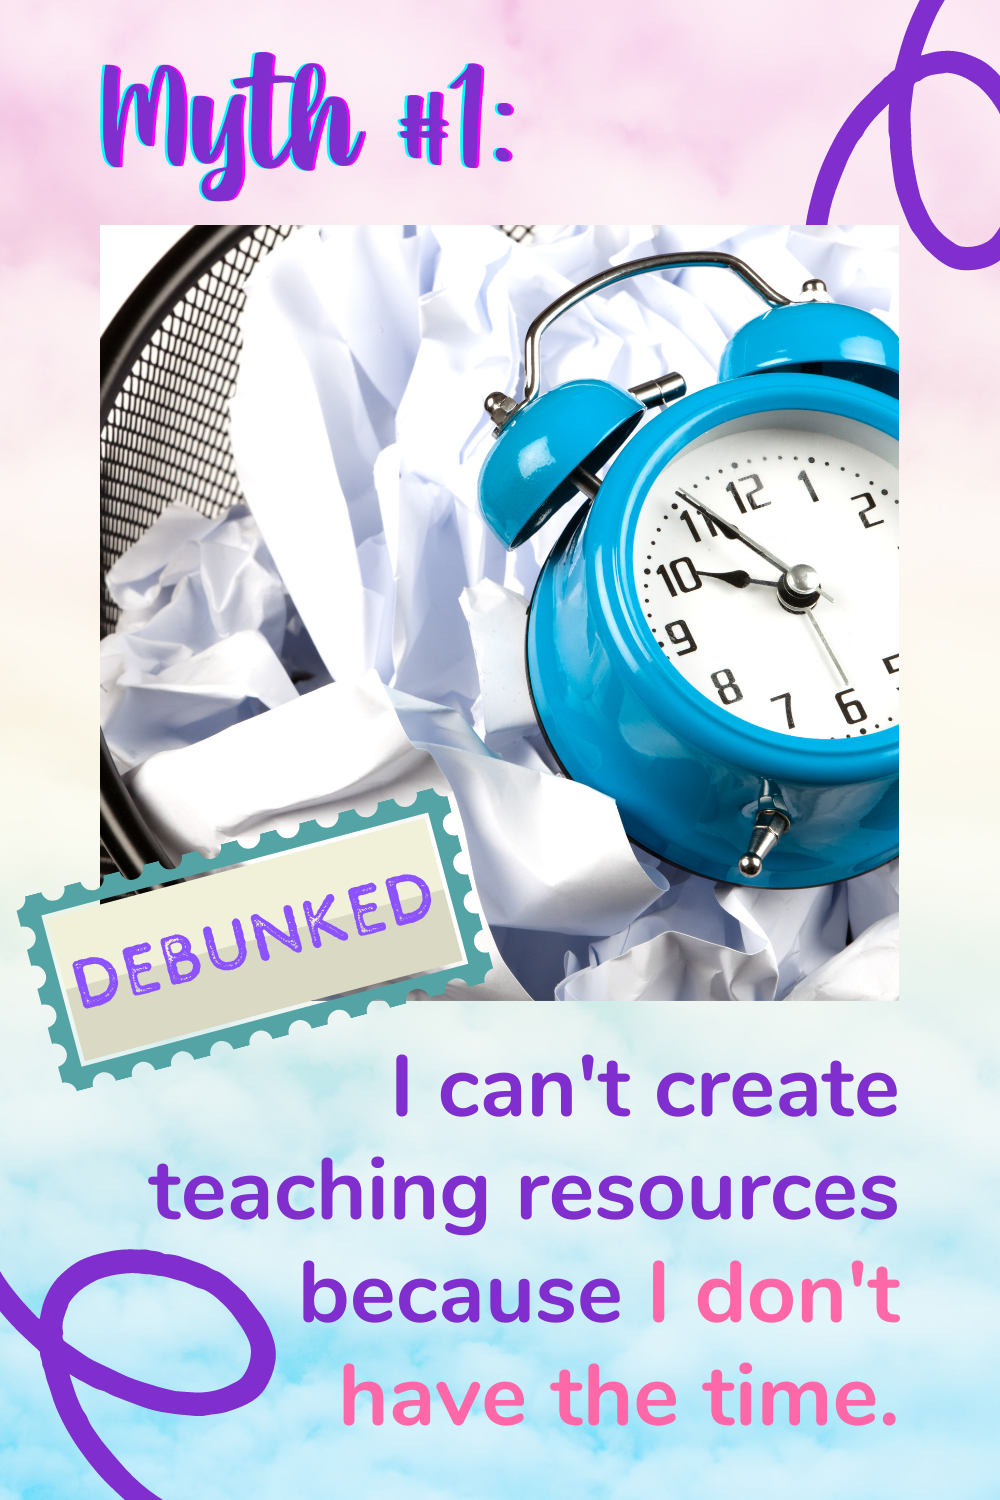 creating-teaching-resources-takes-too-much-time